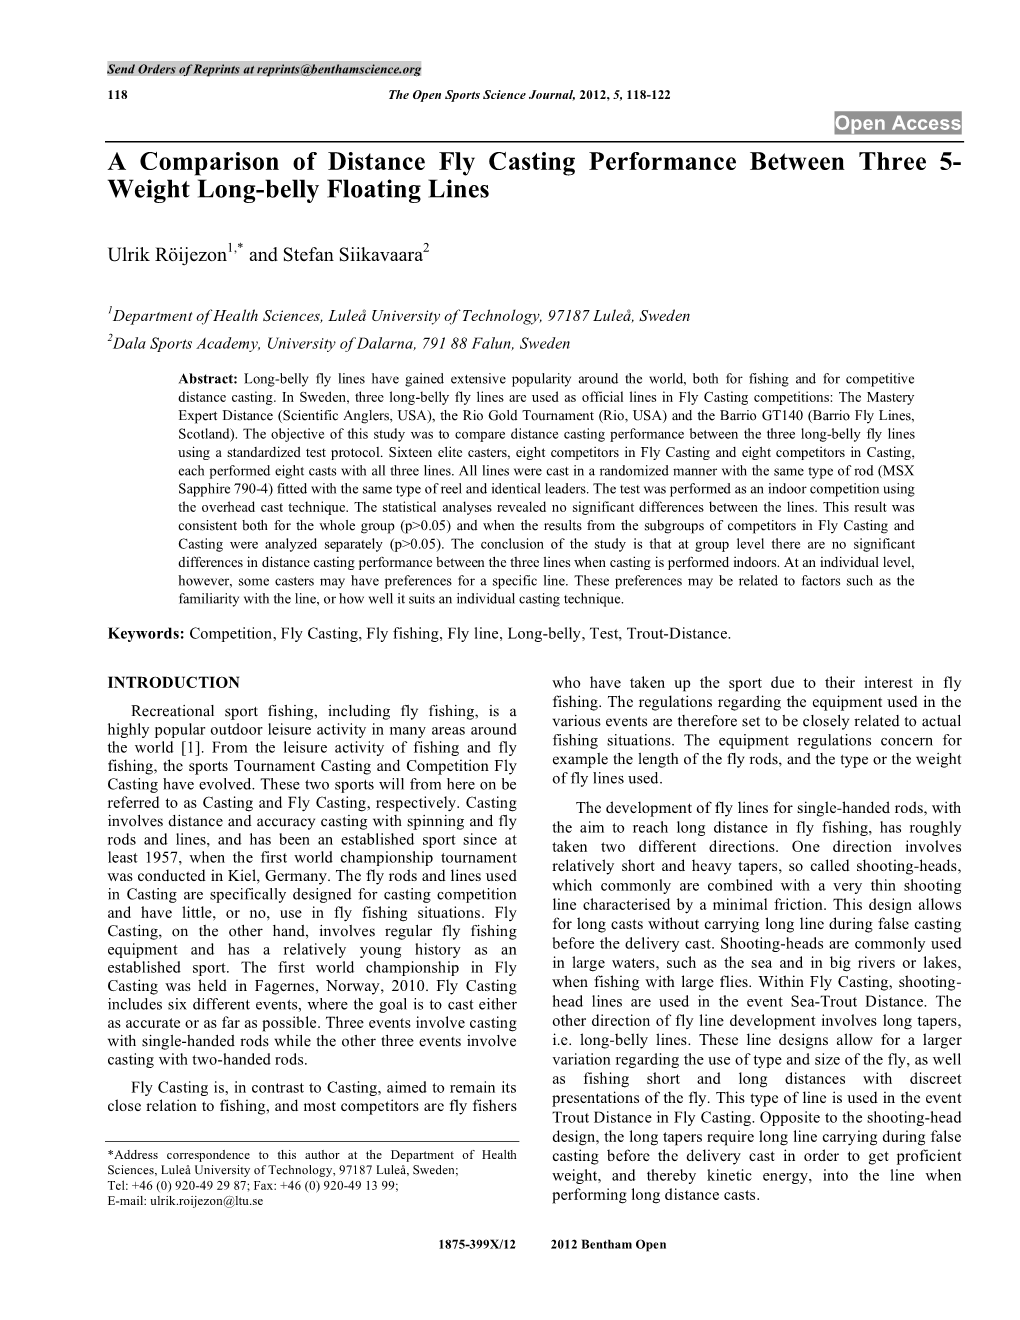 A Comparison of Distance Fly Casting Performance Between Three 5- Weight Long-Belly Floating Lines